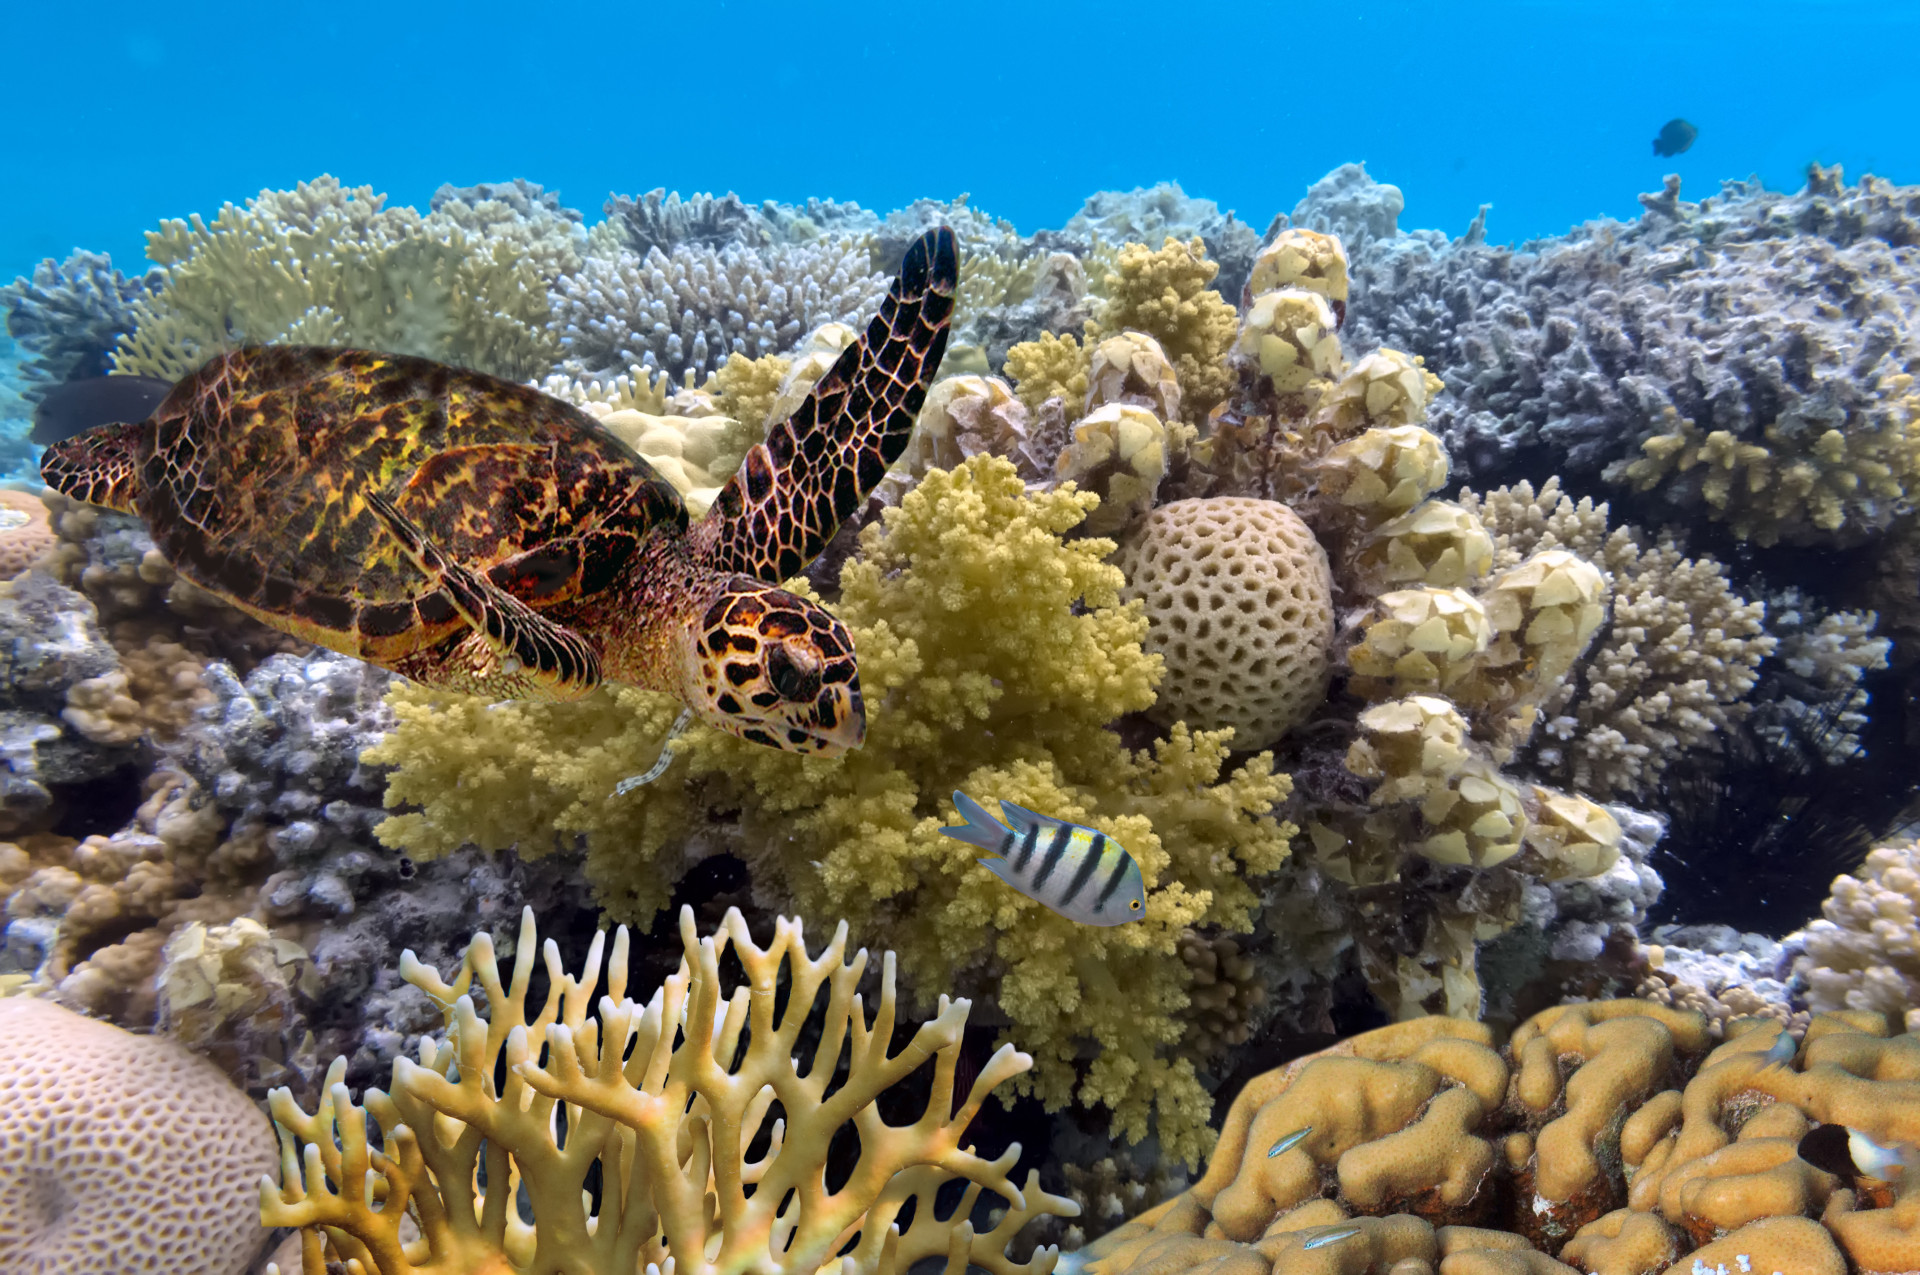 The world's most colorful coral reefs